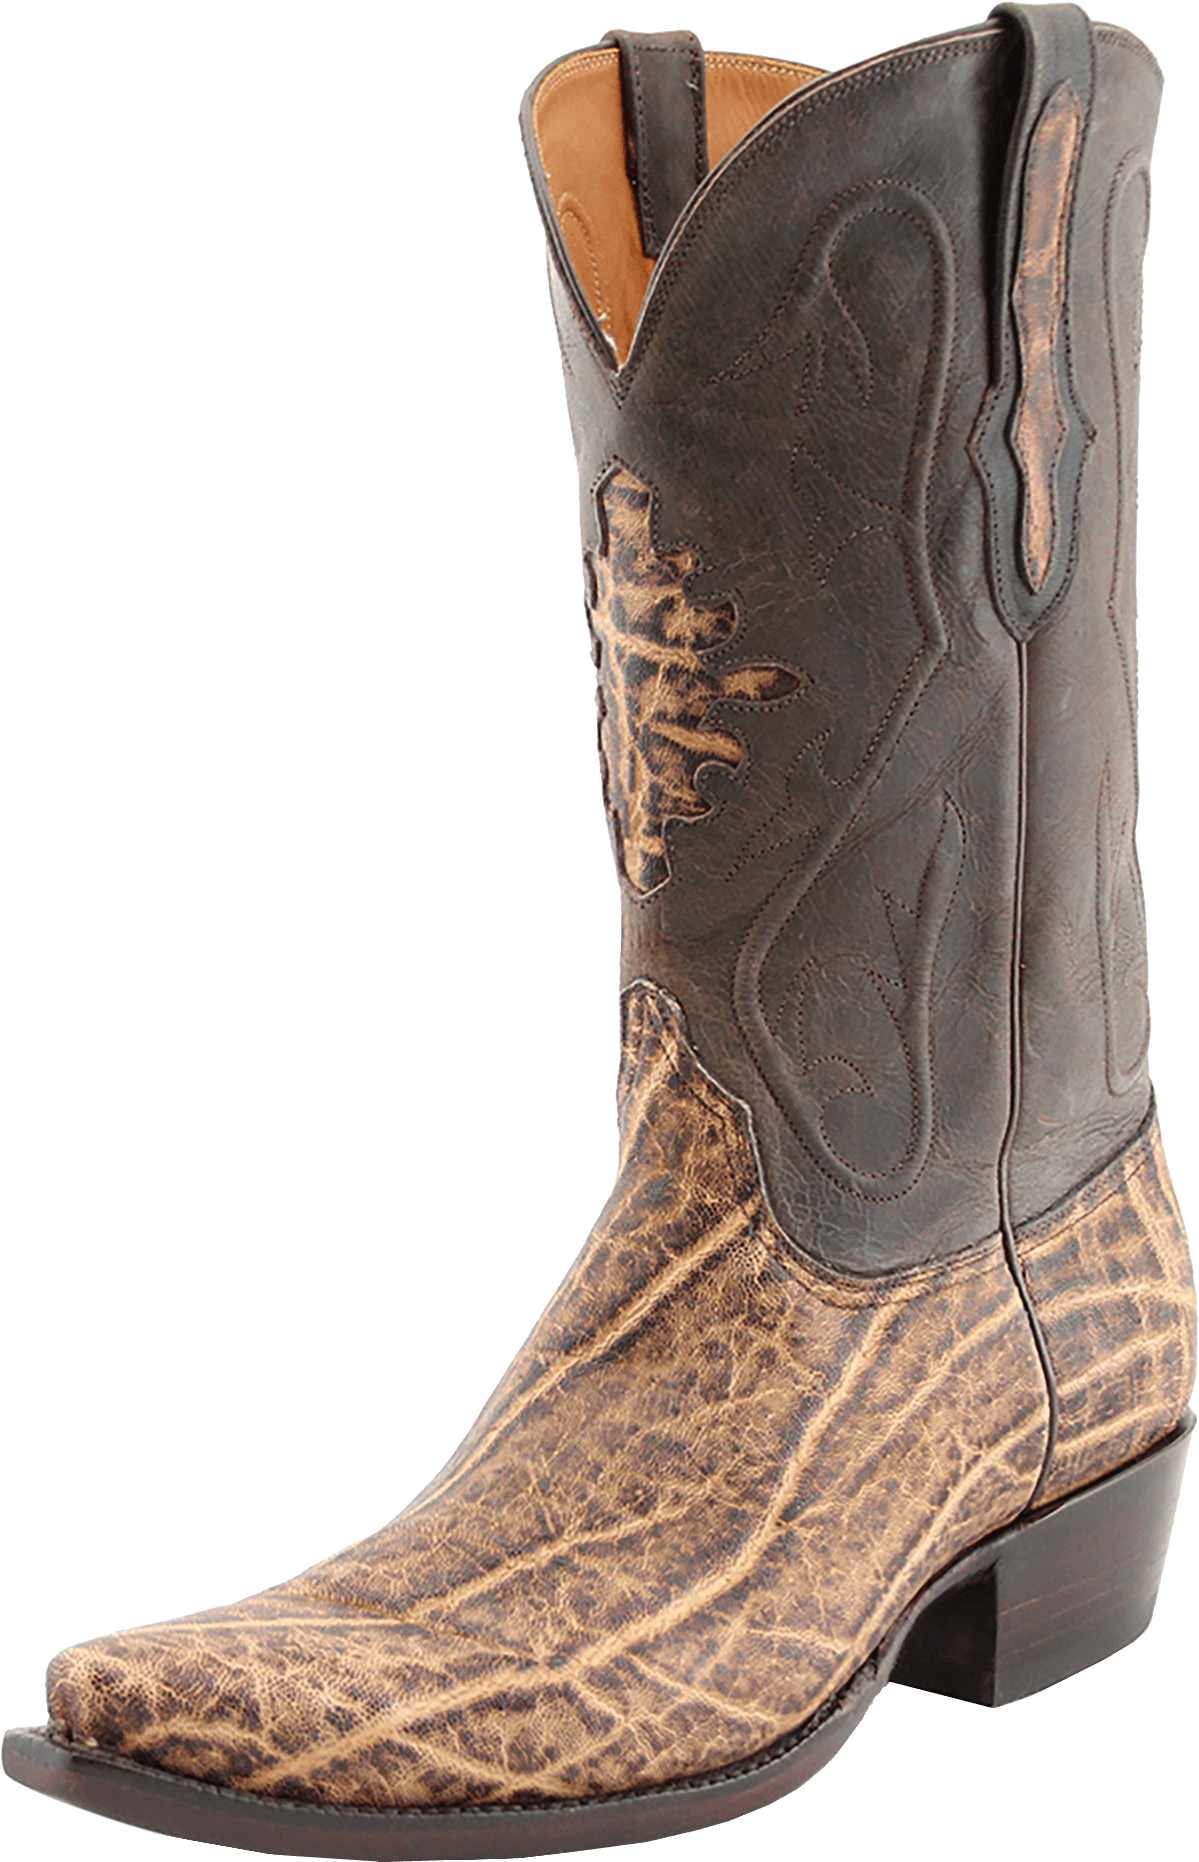 A Brown Cowboy Boot With A Cross On The Side